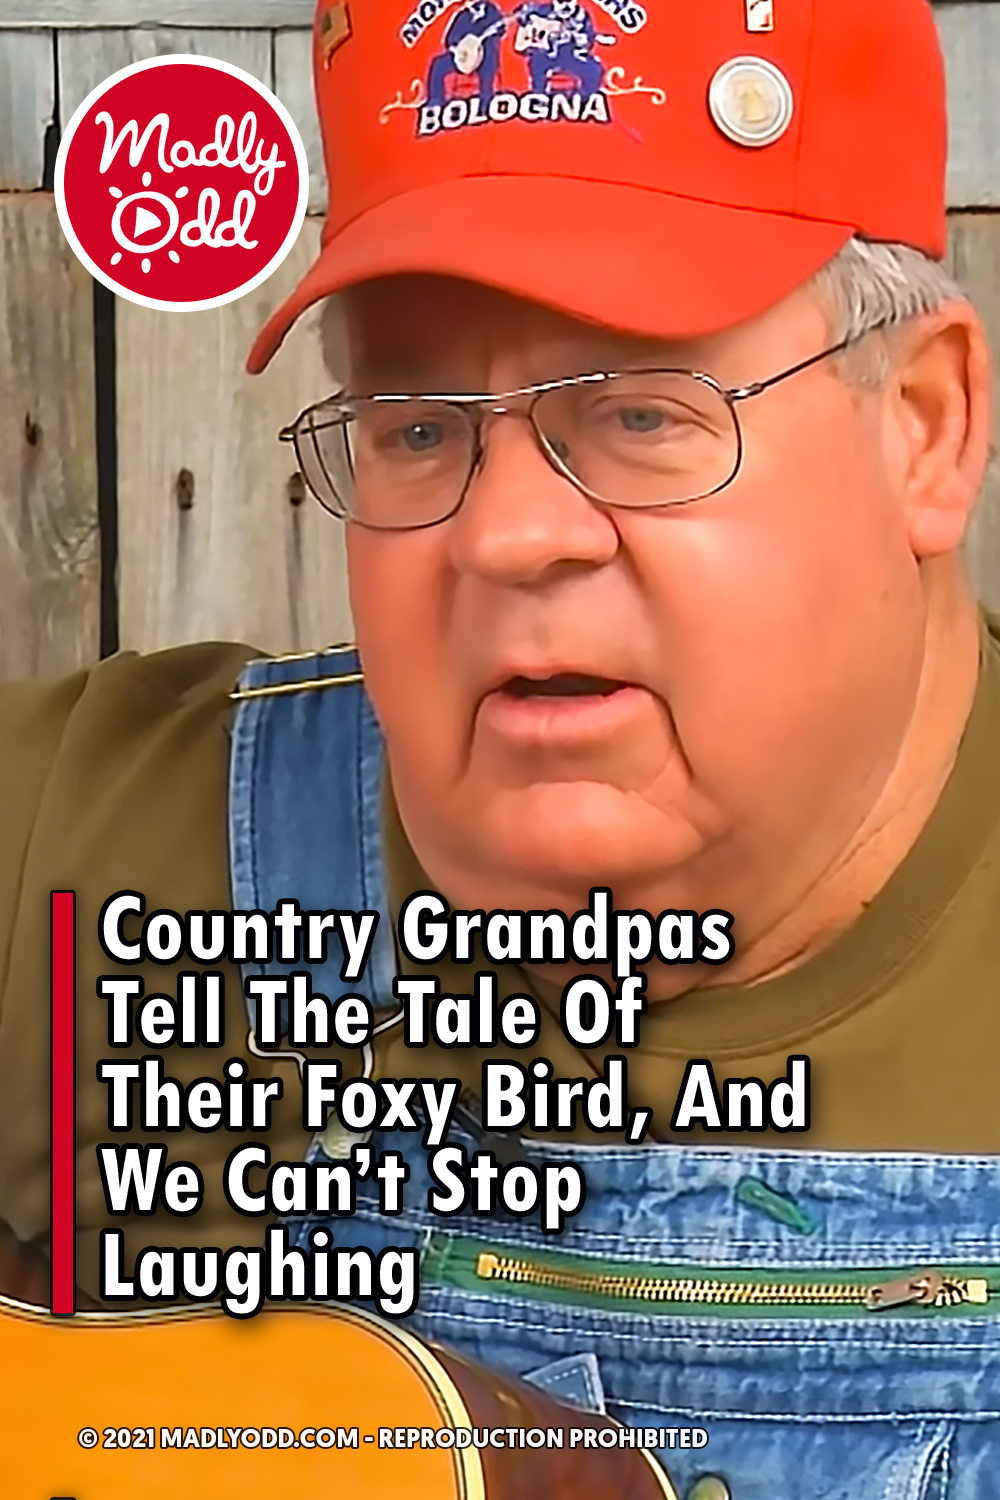 Country Grandpas Tell The Tale Of Their Foxy Bird, And We Can’t Stop Laughing